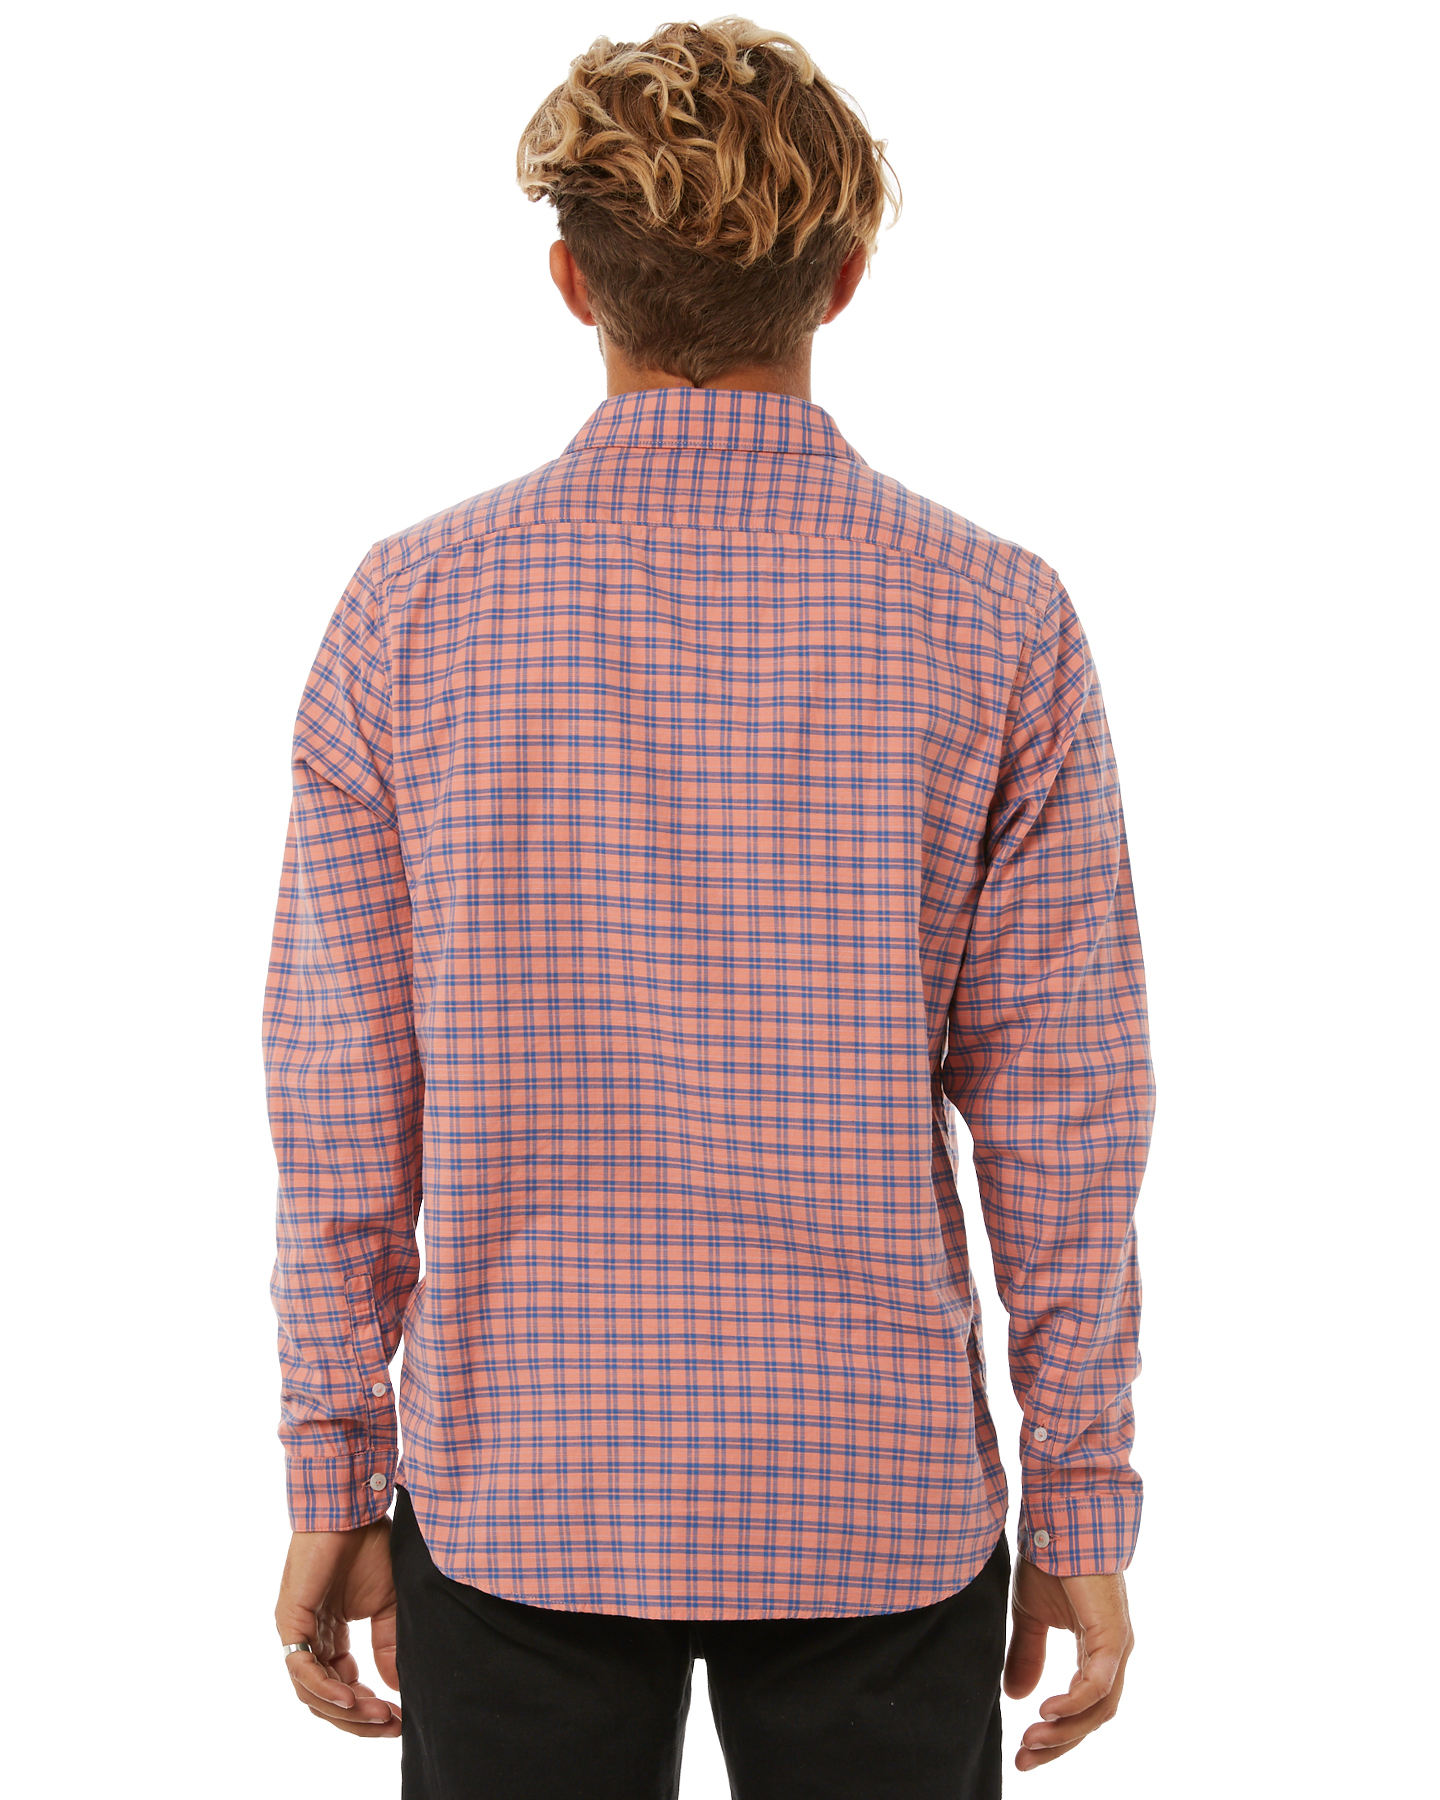 Rvca Delivery Ls Mens Shirt - Terracotta | SurfStitch